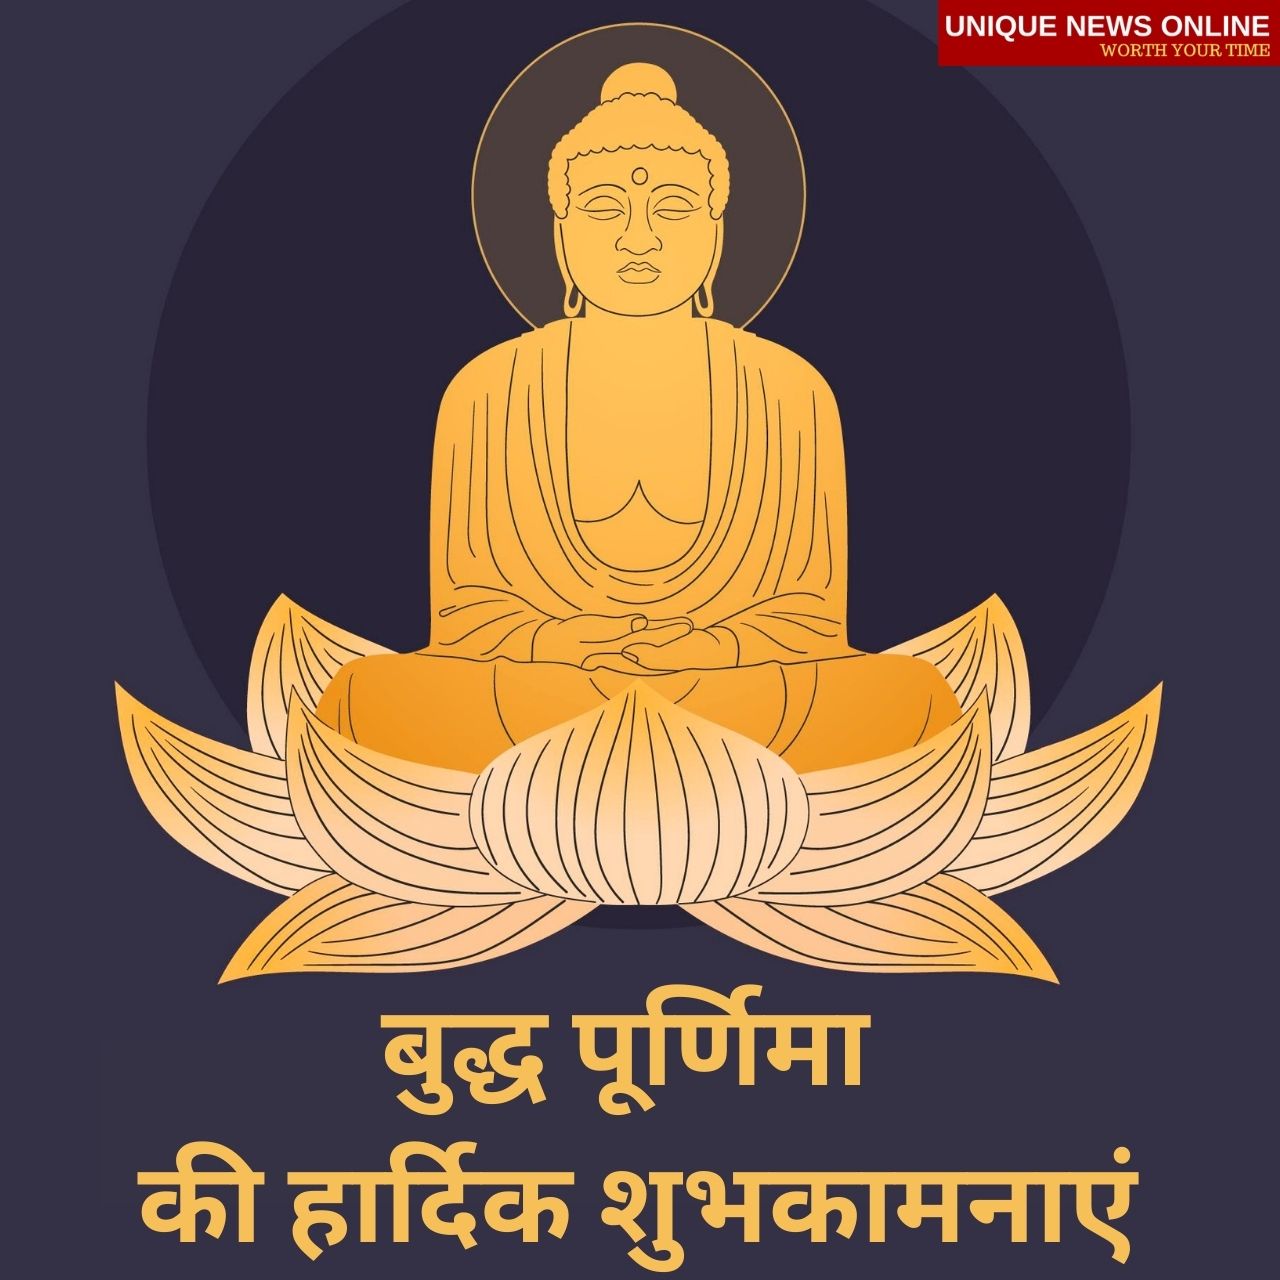 Buddha Purnima 2021: Hindi Wishes, HD Images, Greetings, Quotes, Status, and WhatsApp Messages to Share